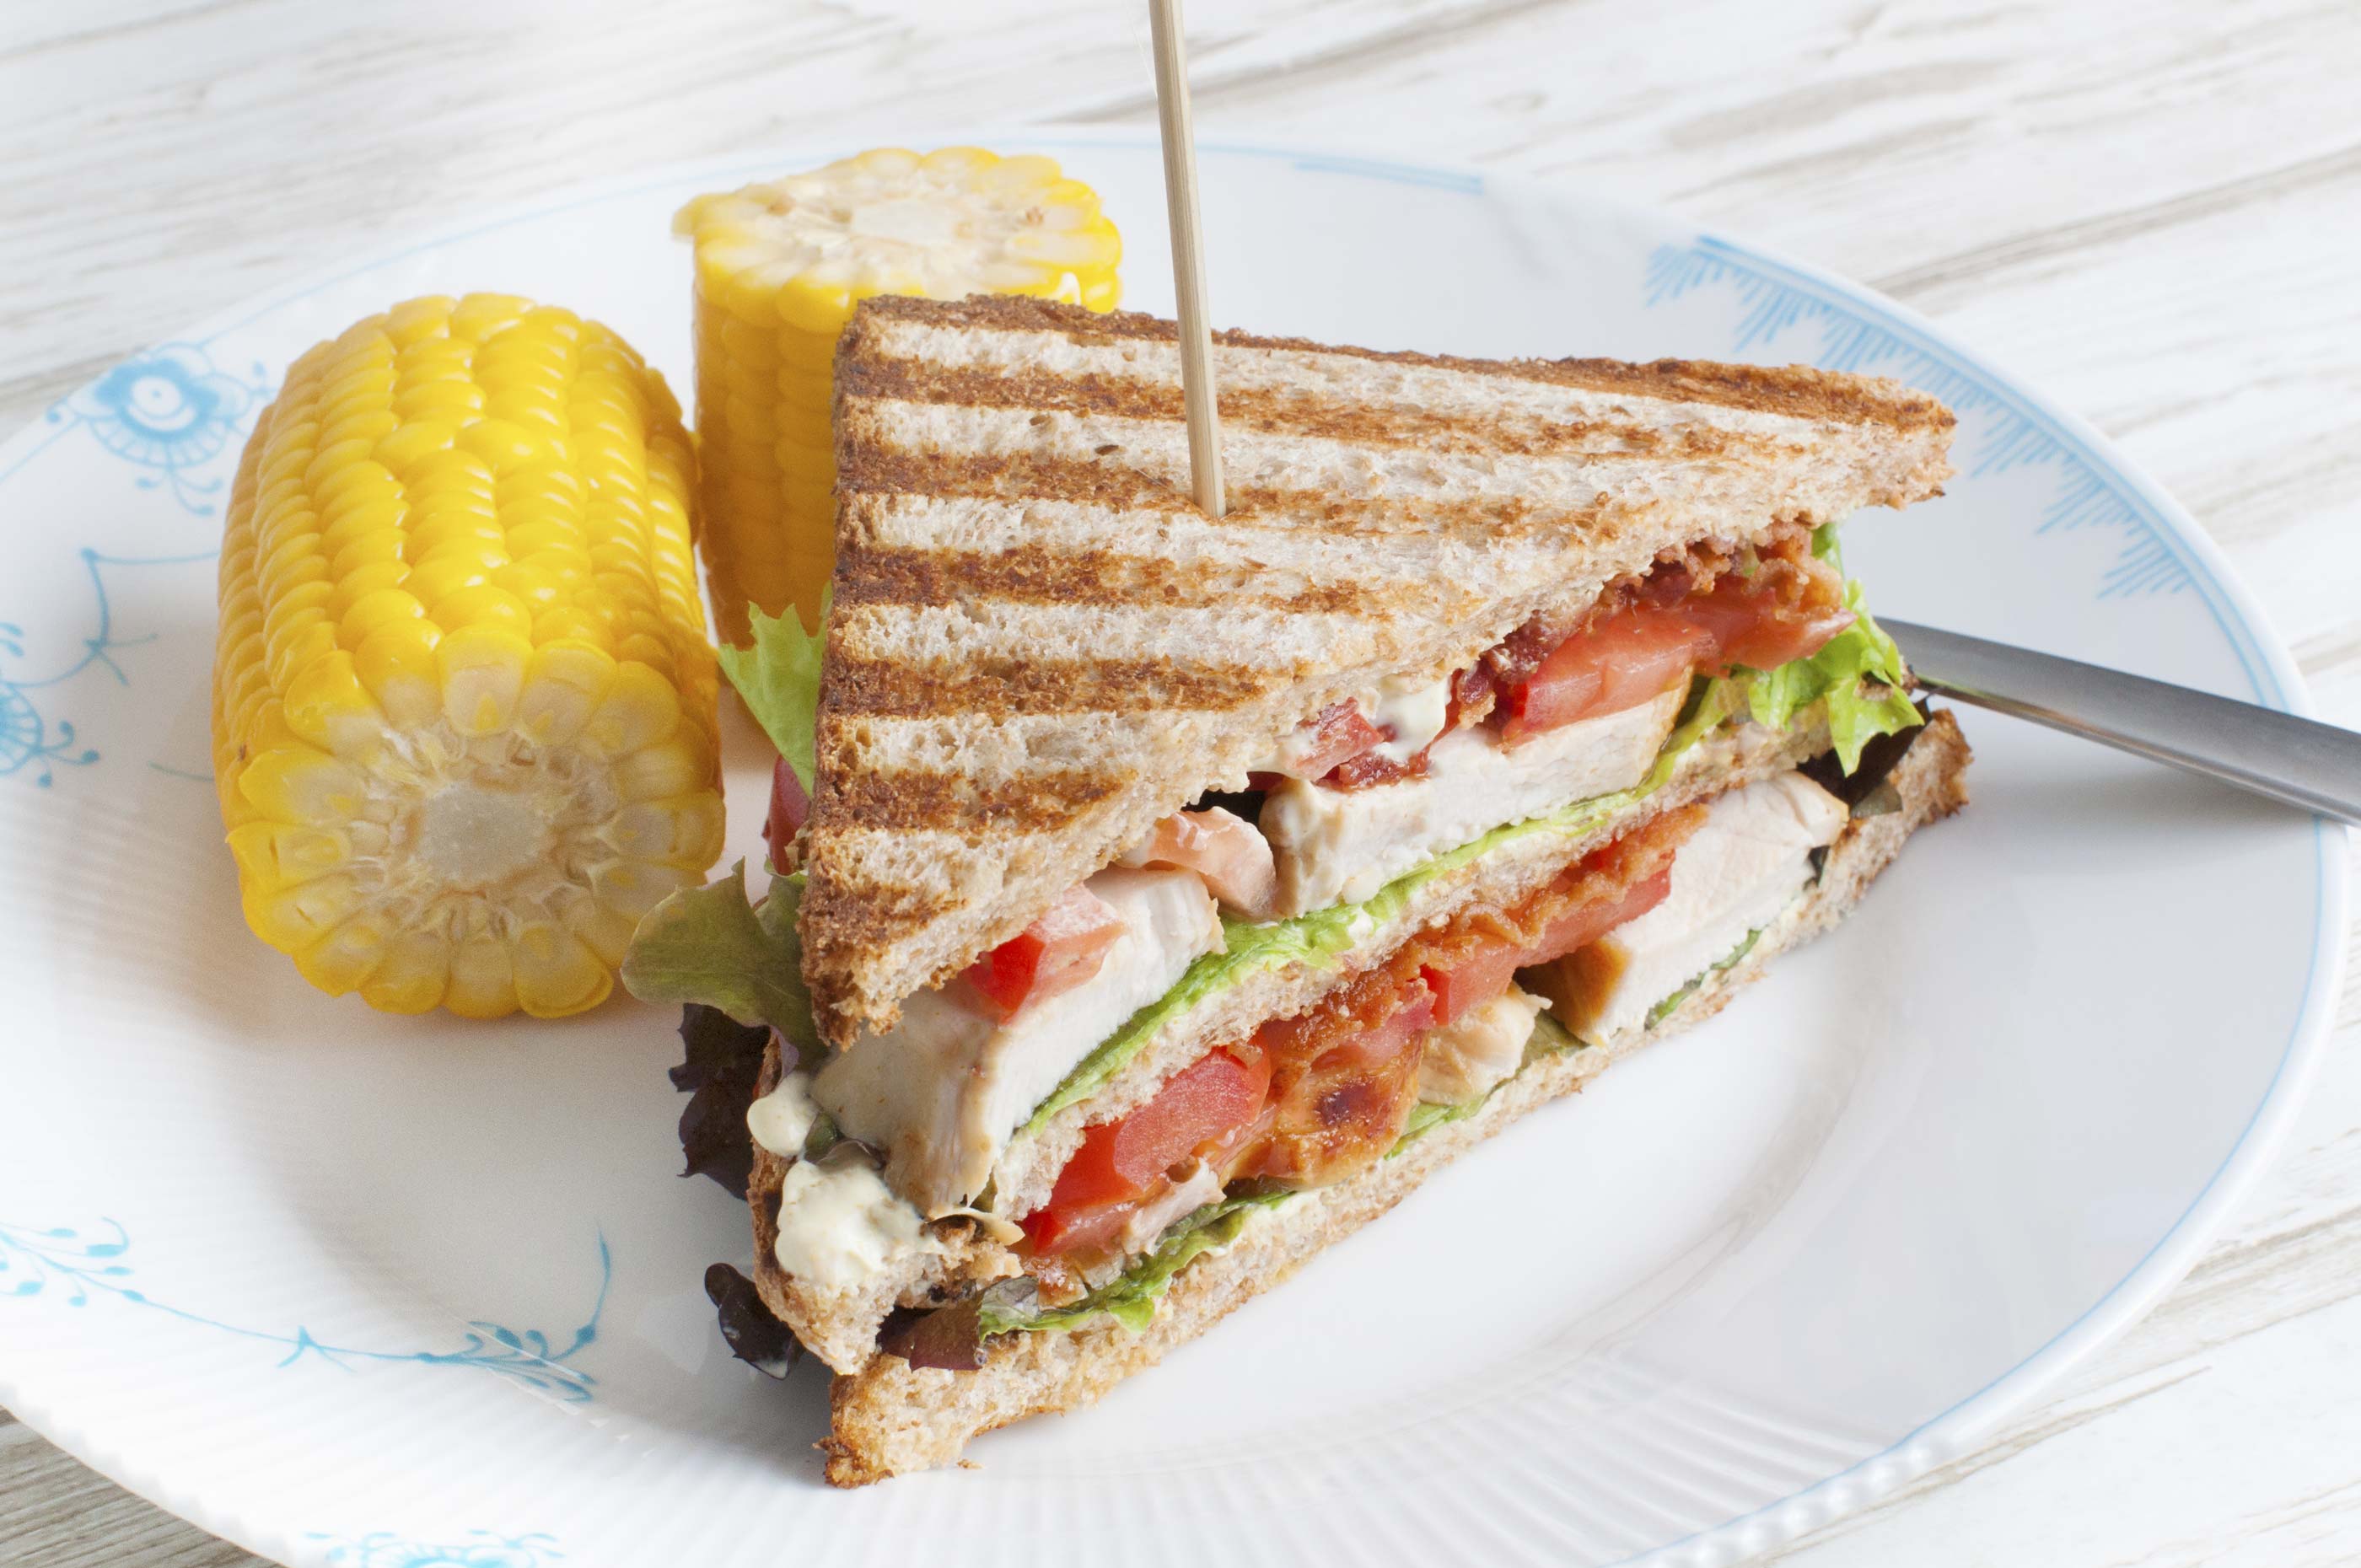 Club sandwich with chicken, bacon, lettuce and curry mayo